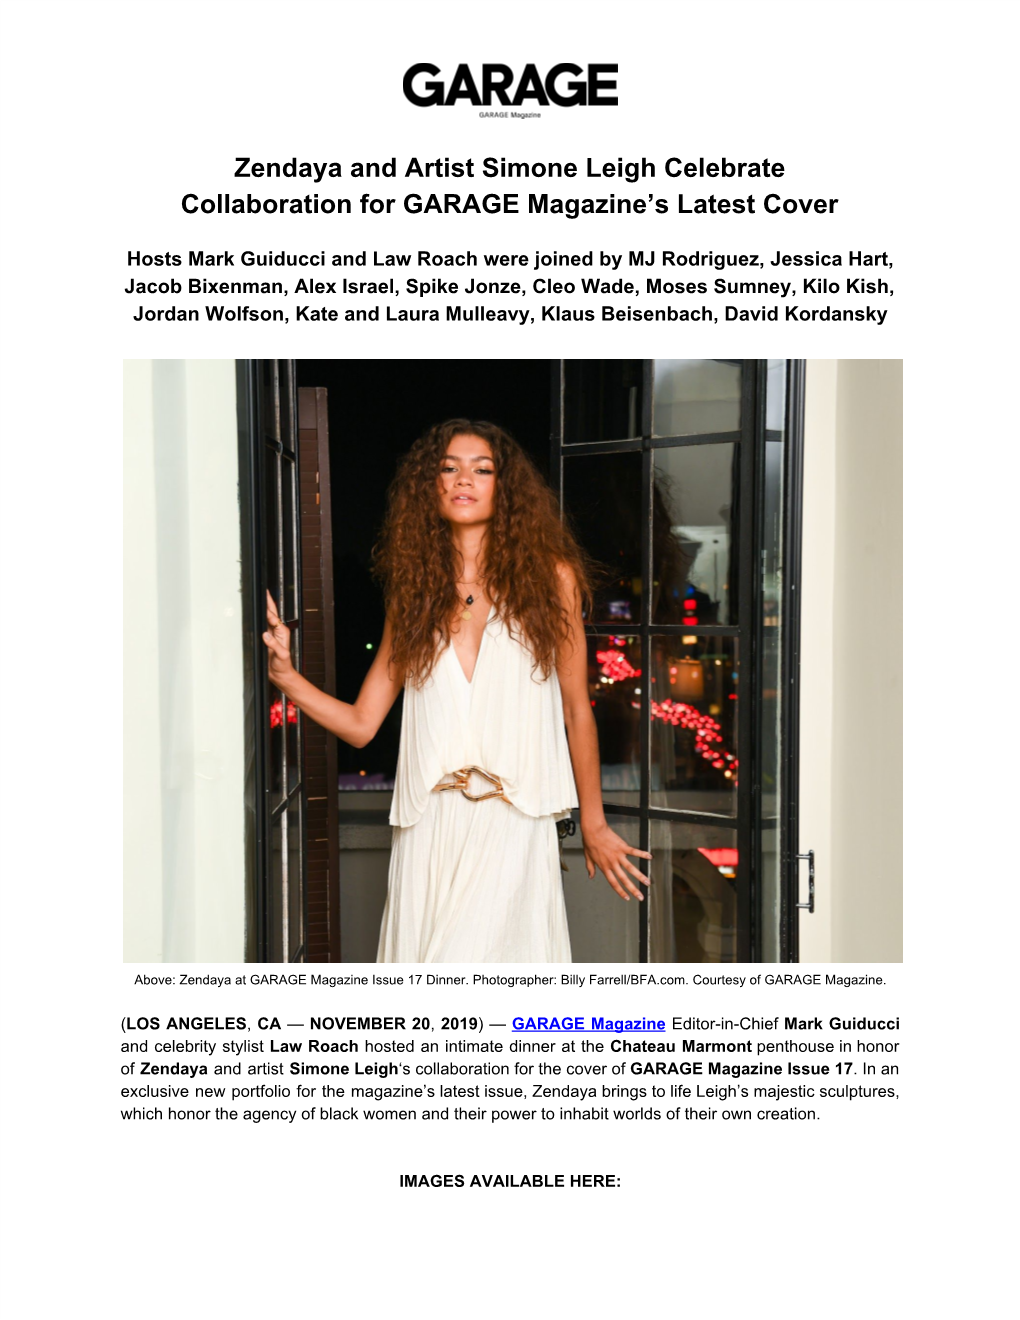 Zendaya and Artist Simone Leigh Celebrate Collaboration for GARAGE Magazine’S Latest Cover